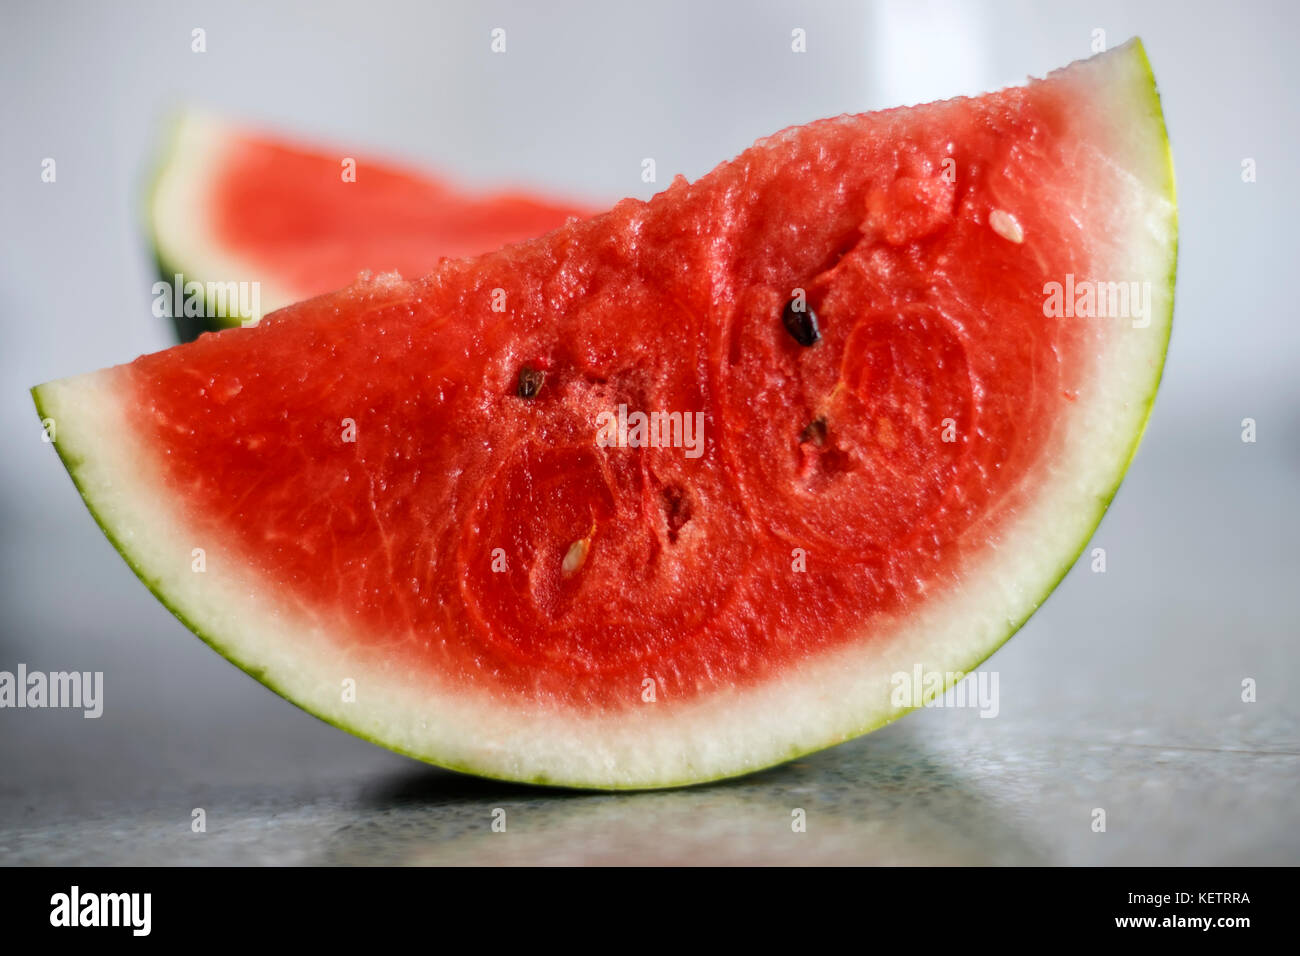 Slice of ripe watermelon on a blurred background Stock Photo